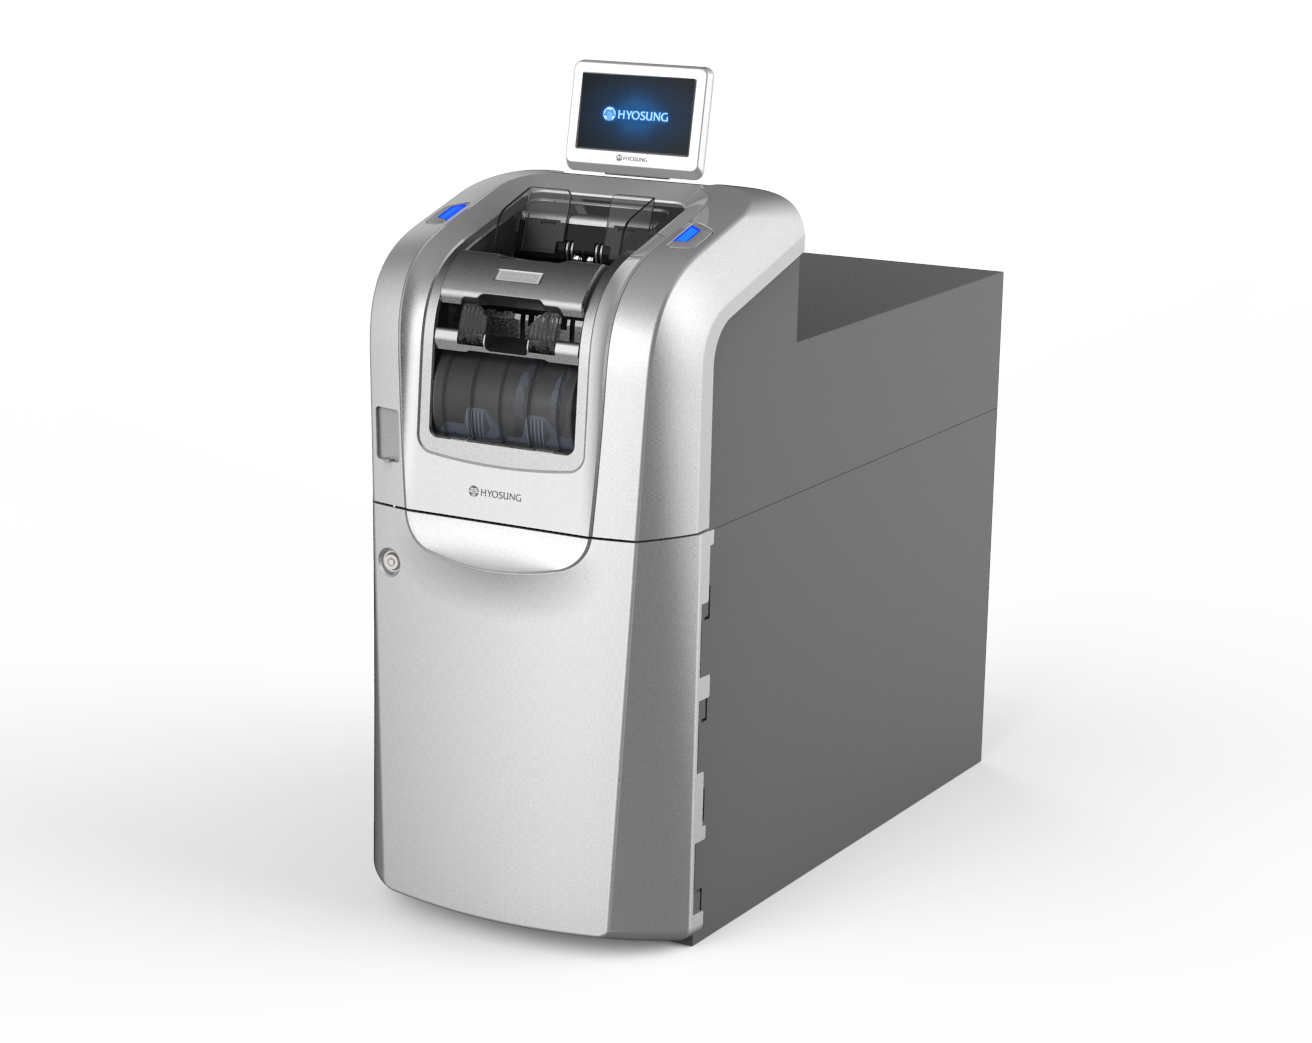 MS-500S Perspective Image Money Handling Machines and Security Solutions for Financial Institutions